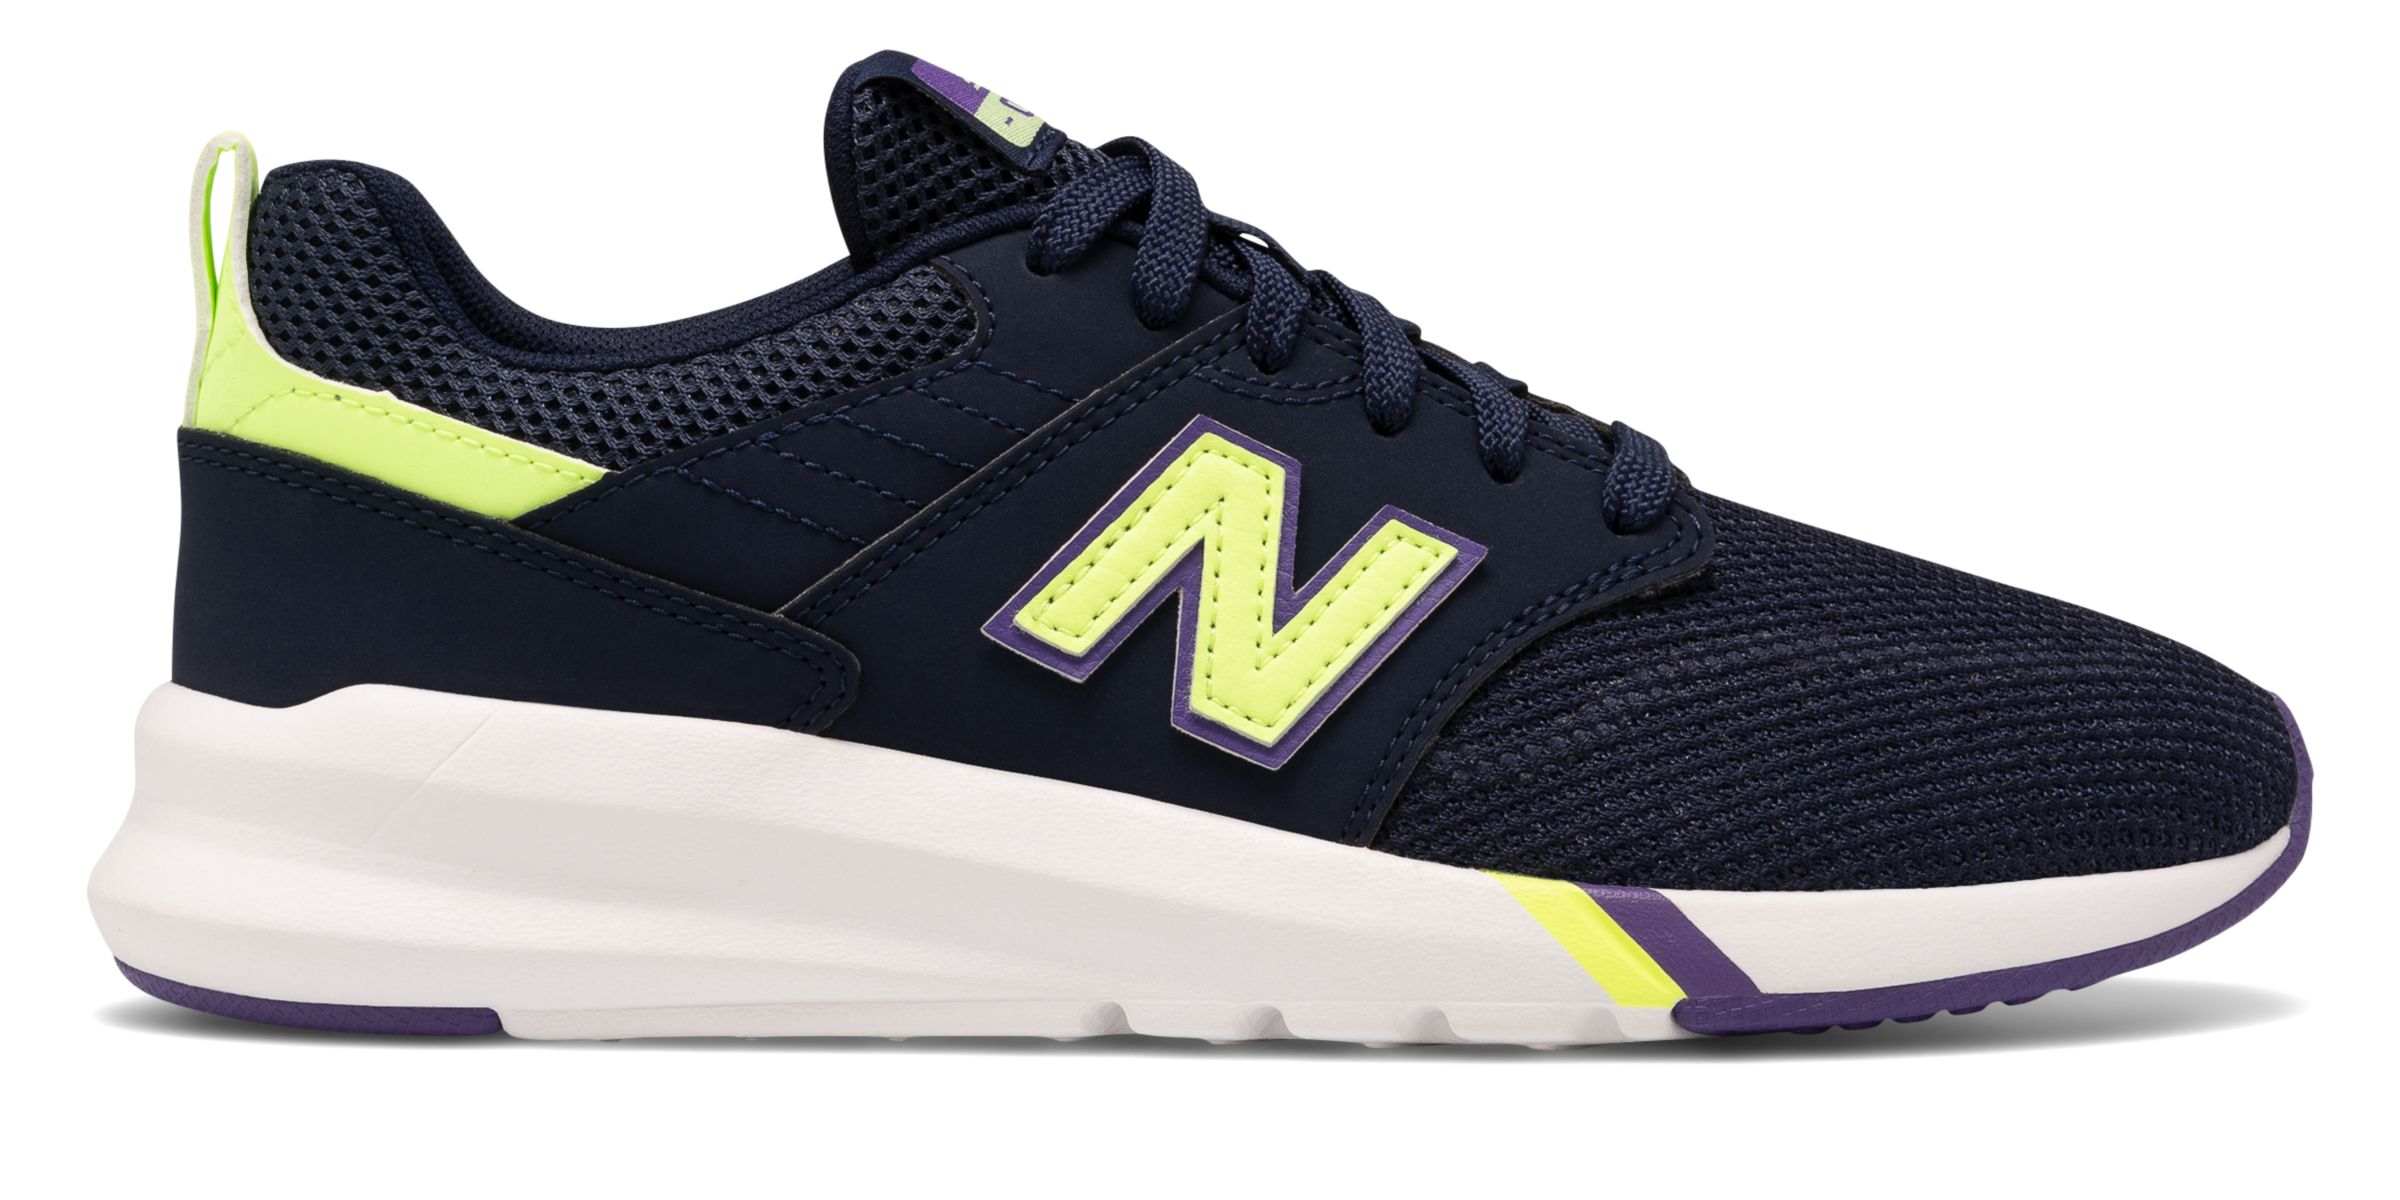 New Balance WS009V1-30255-W on Sale - Discounts Up to 66% Off on WS009SN1  at Joe's New Balance Outlet